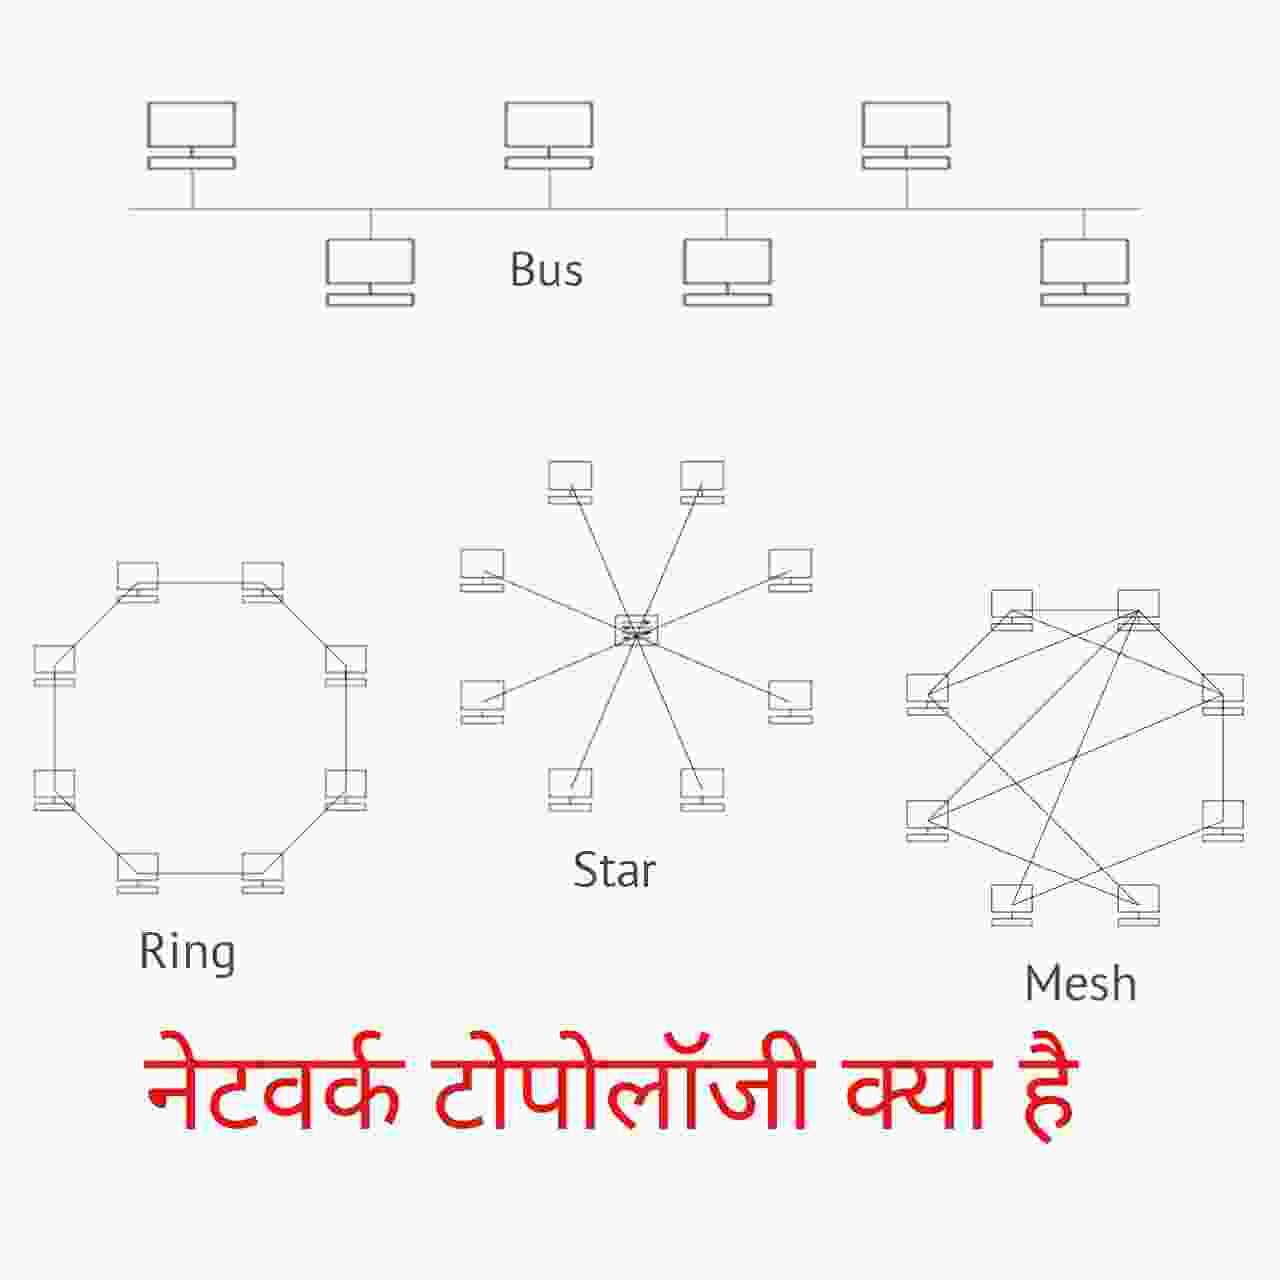 You are currently viewing topology in computer network in hindi – विभिन्न टोपोलॉजी के प्रकार